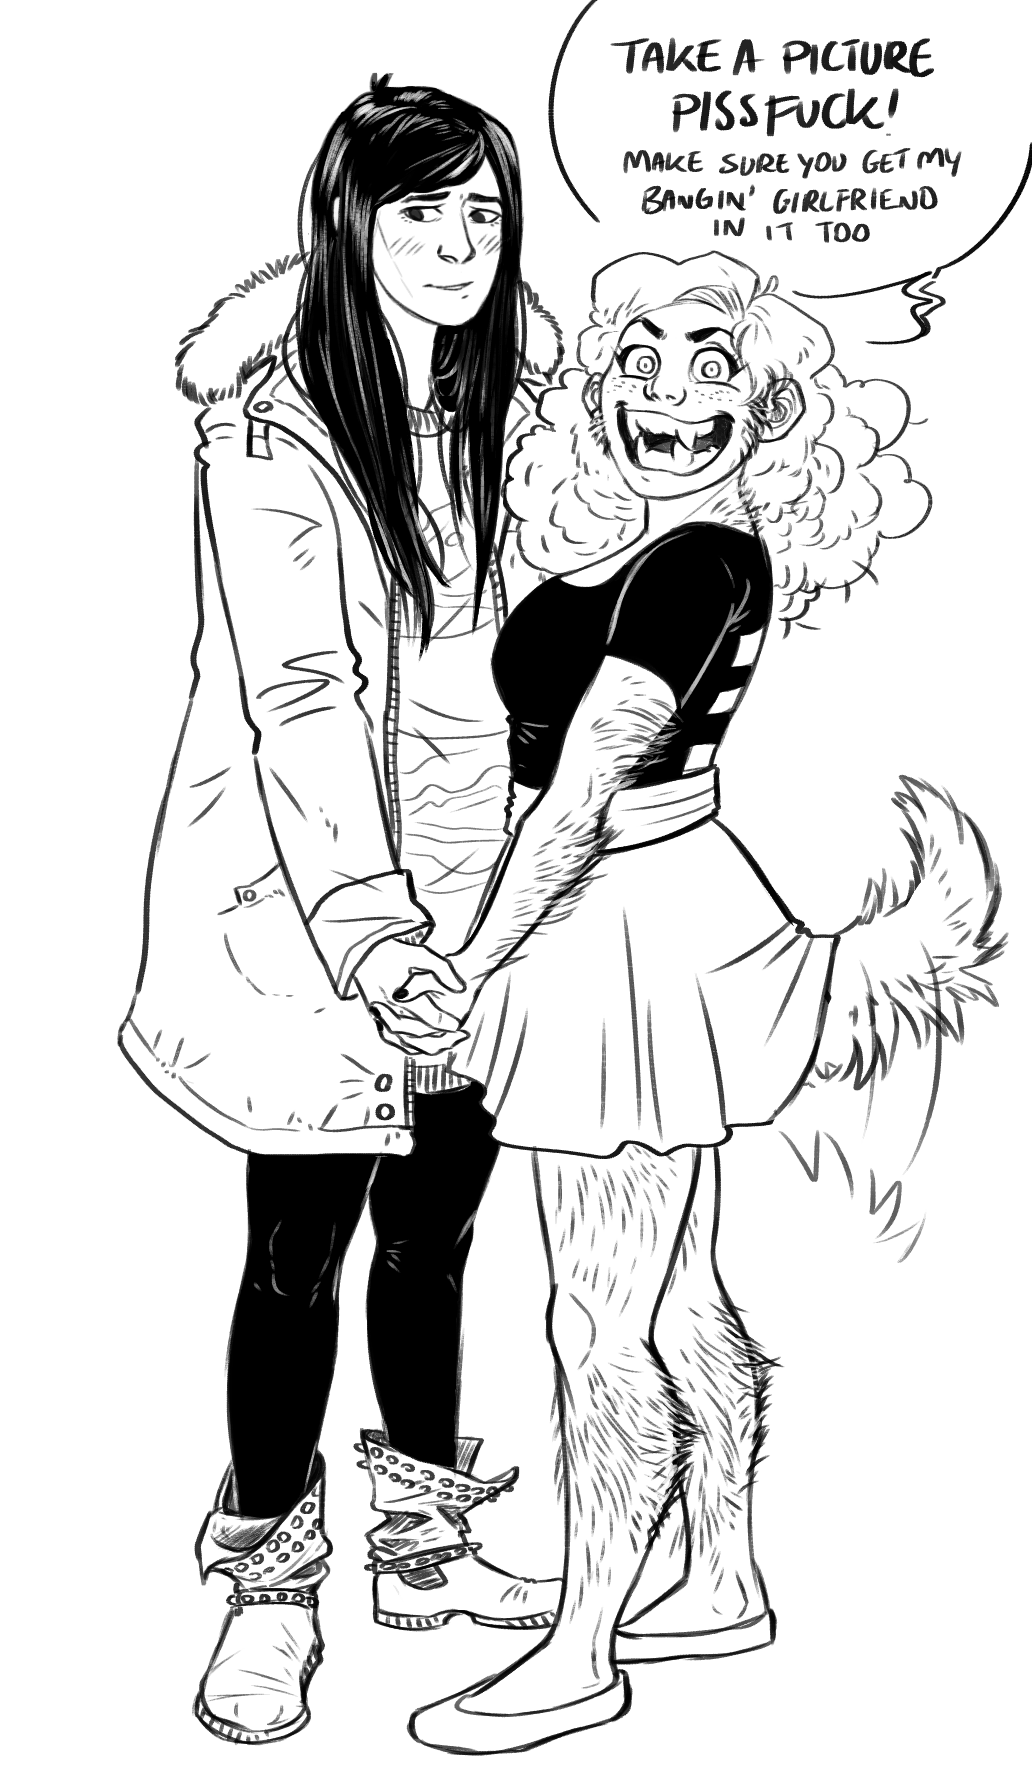 ofools:  tfw your werewolf gf has bad language and wants to fight everyone and you’re